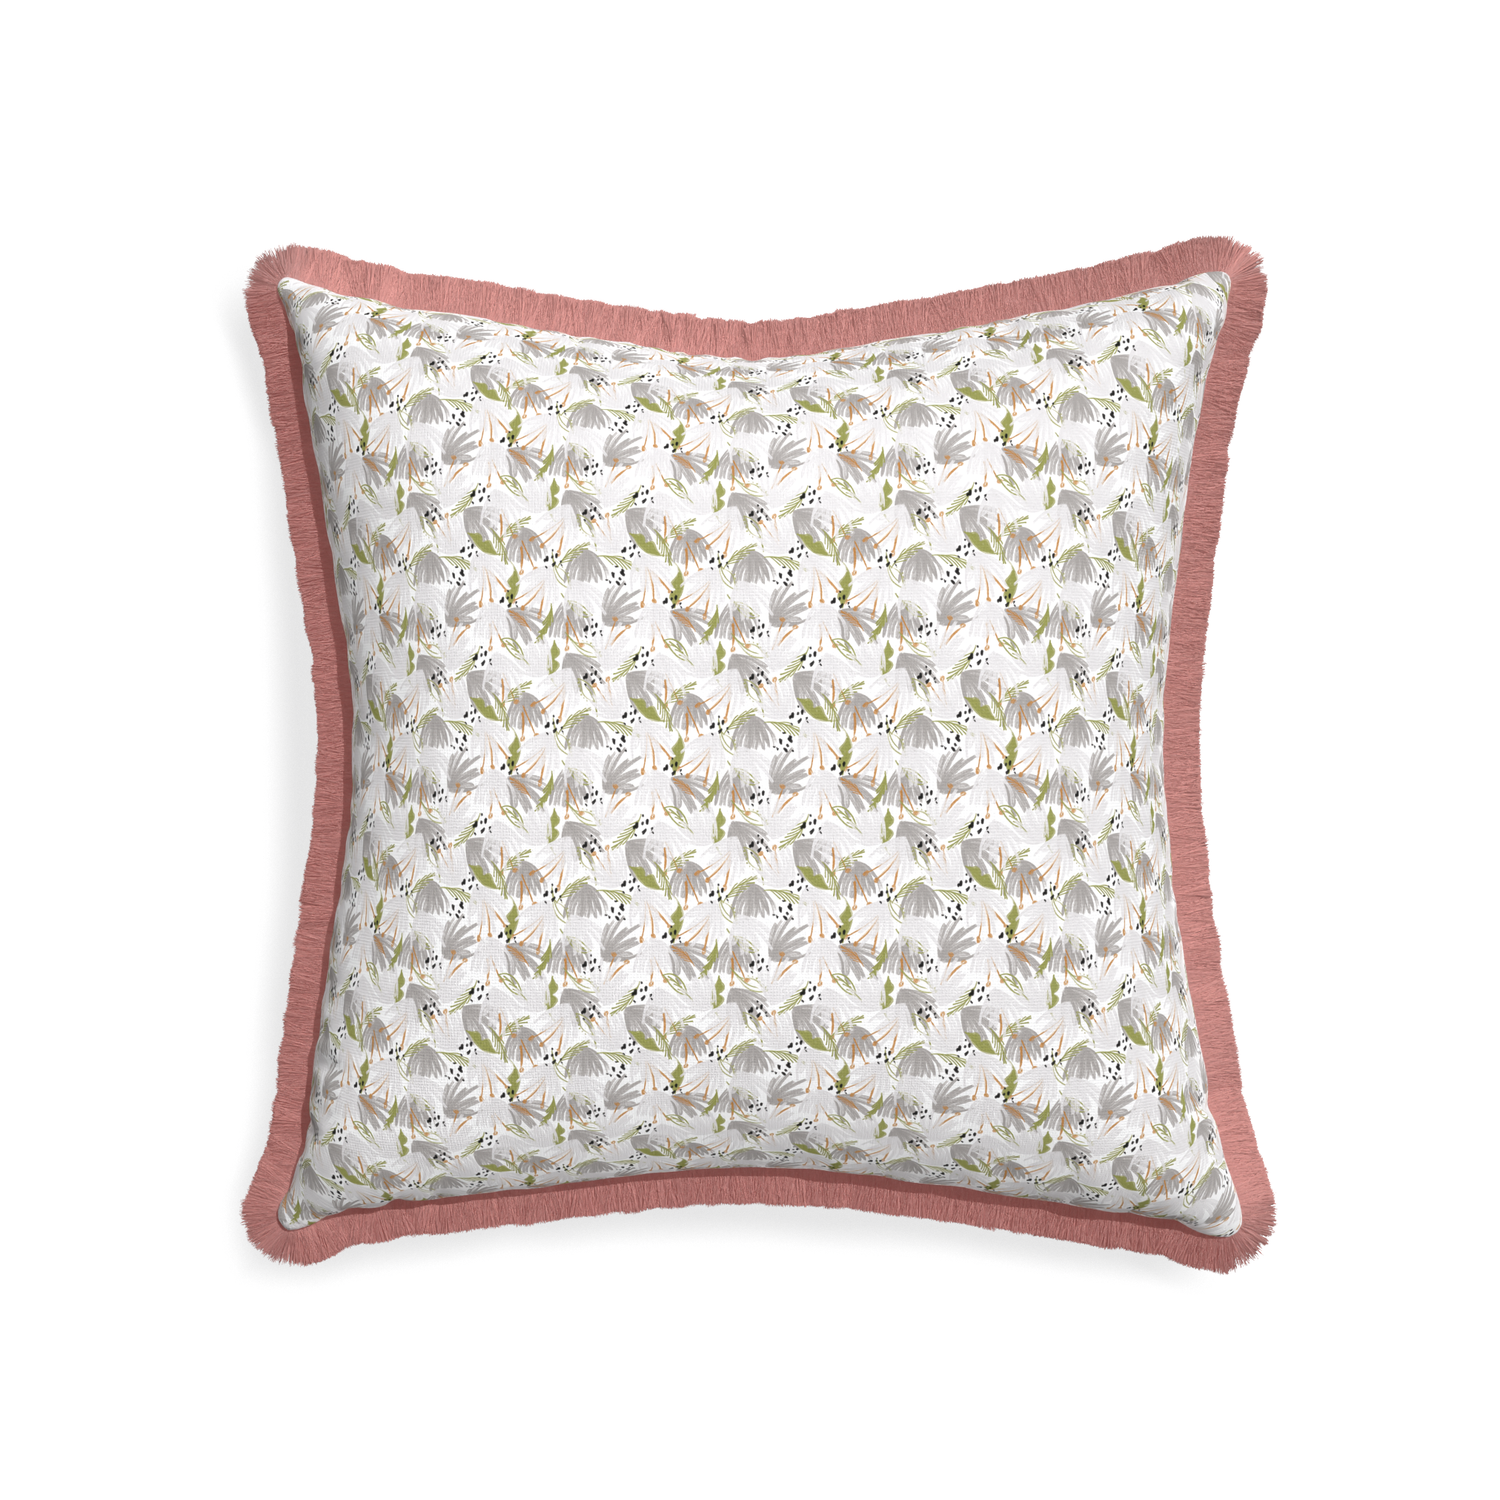 22-square eden grey custom grey floralpillow with d fringe on white background